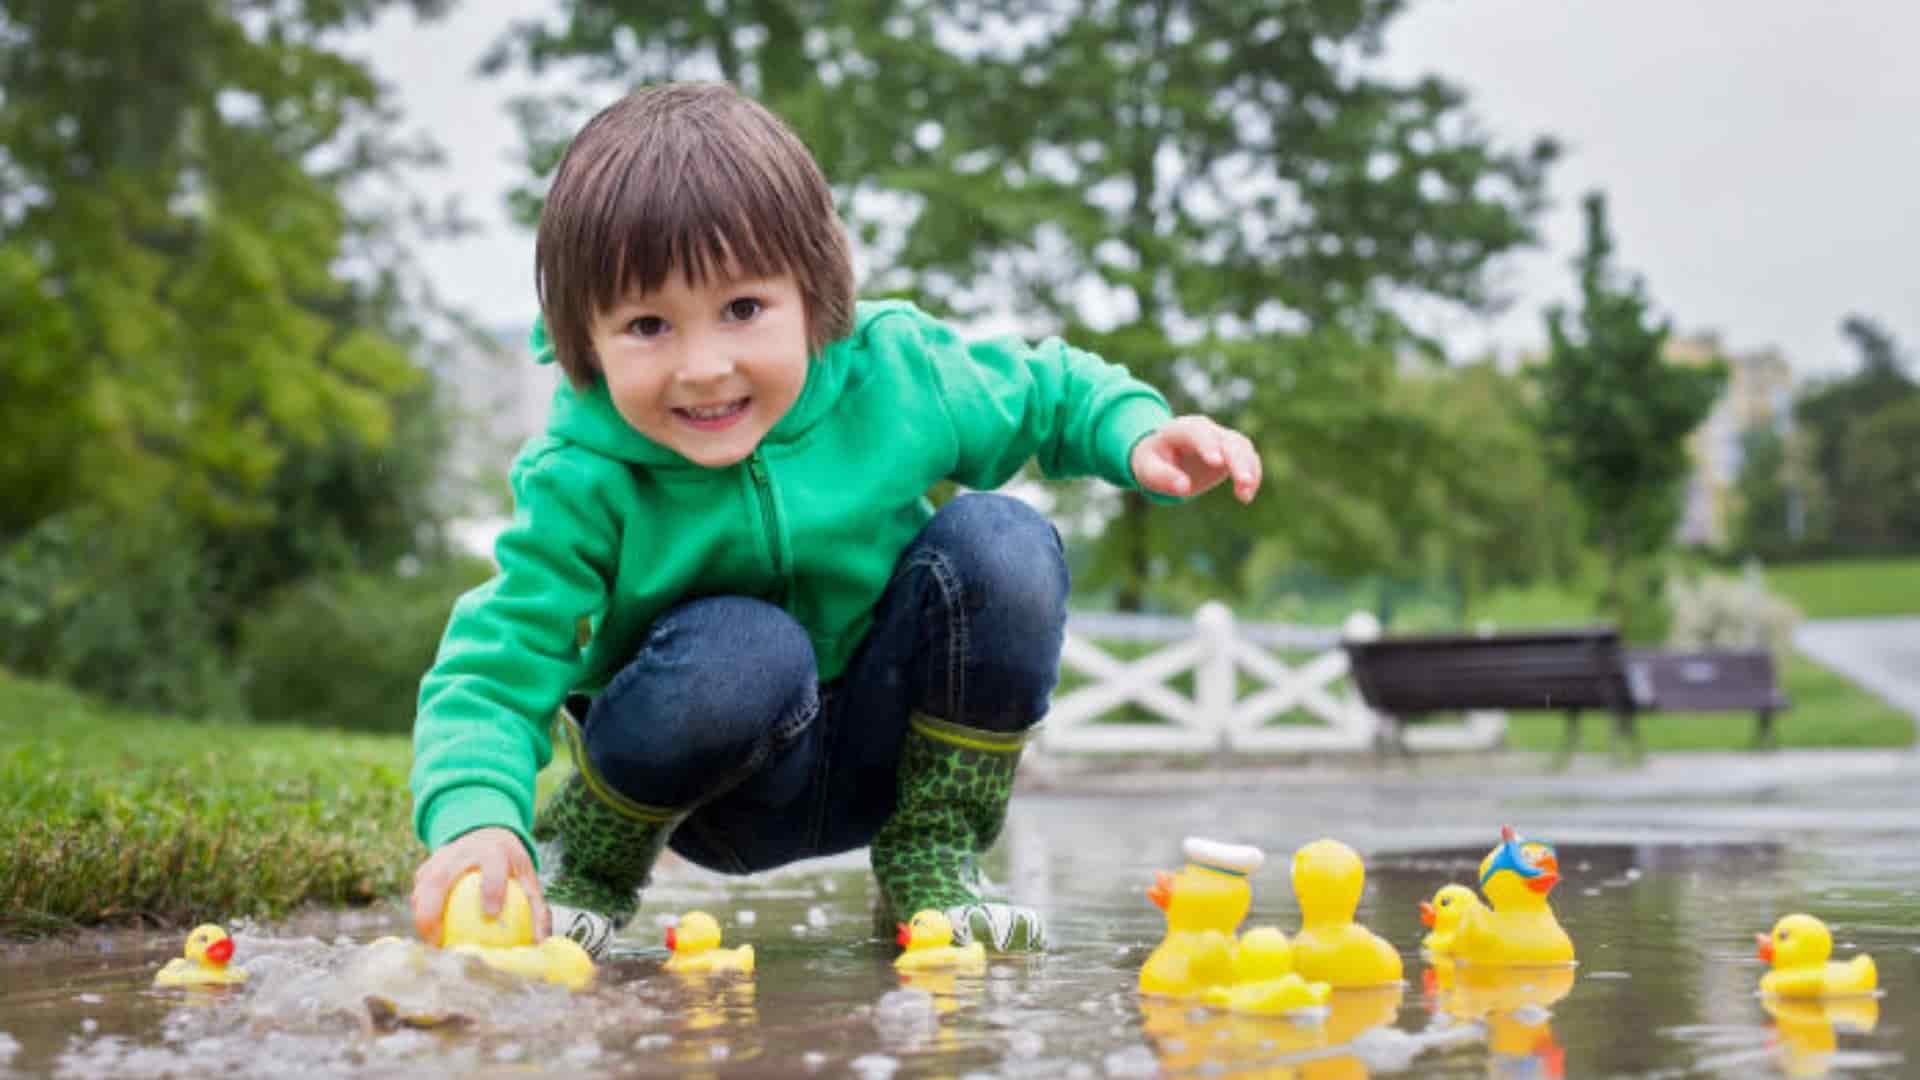 Play with Water Toys in Puddles